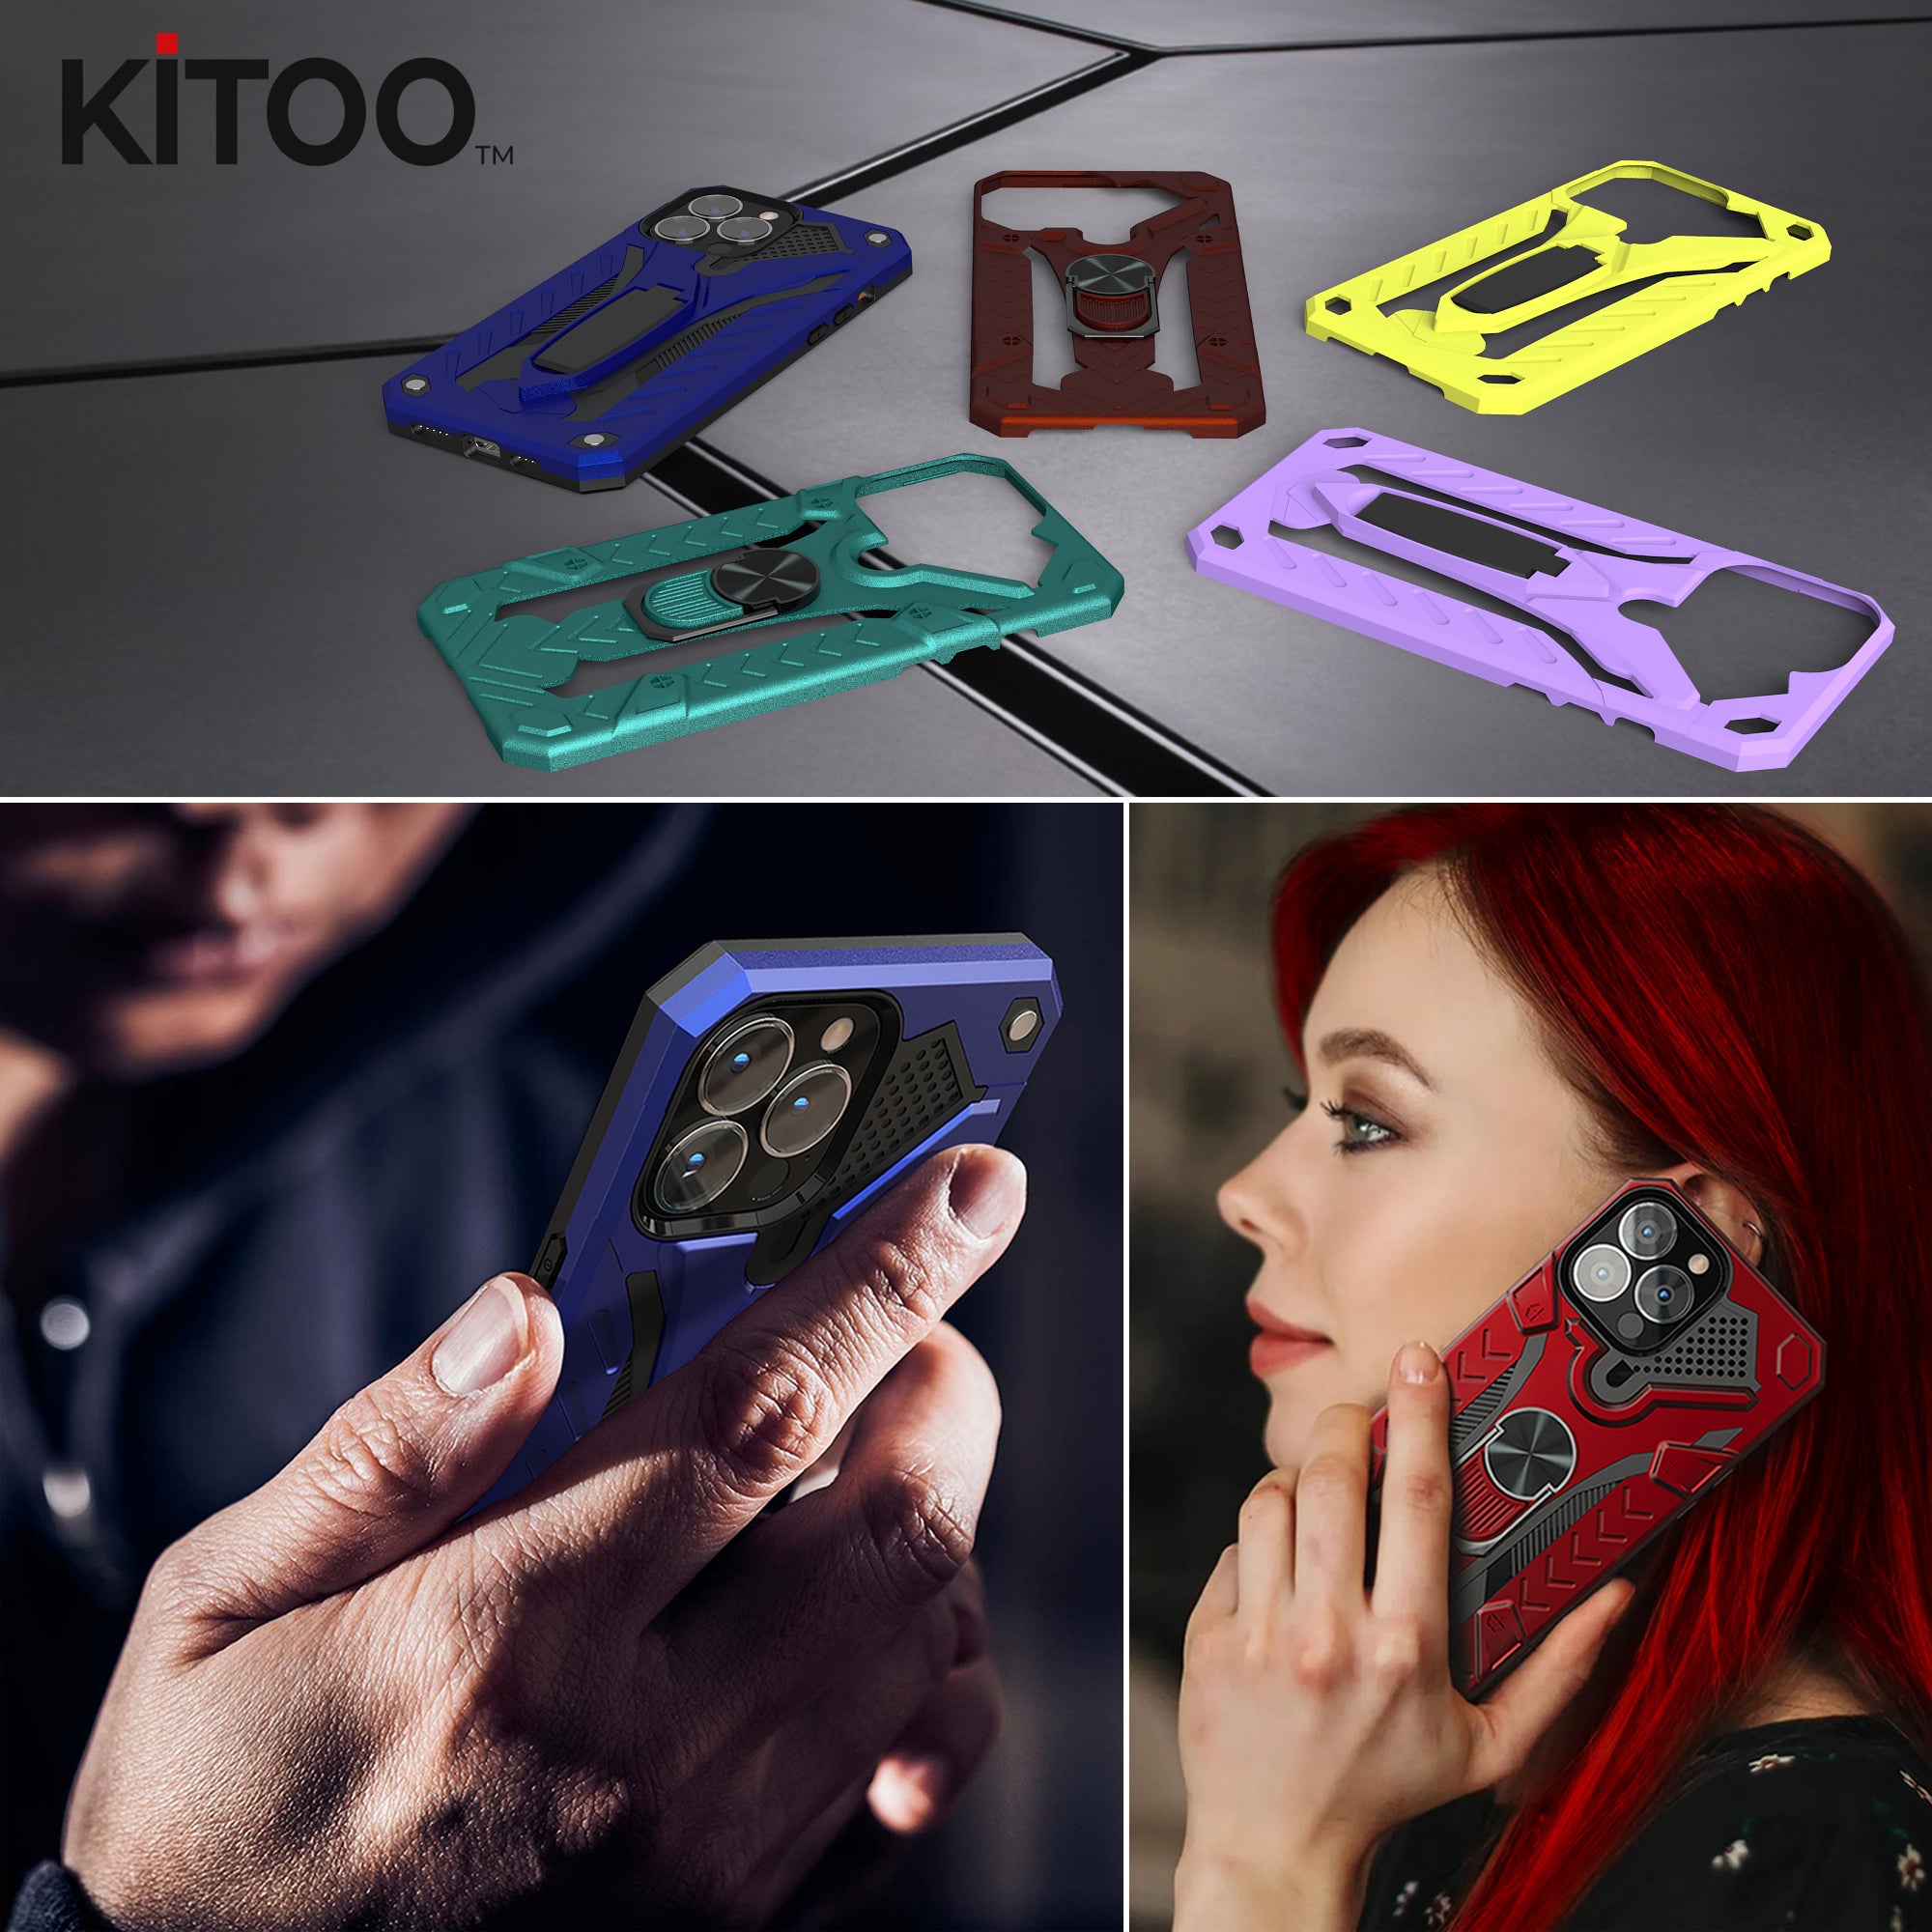 Kitoo Ring Panel Designed for iPhone 13 Mini case (Spare Part only) - Black